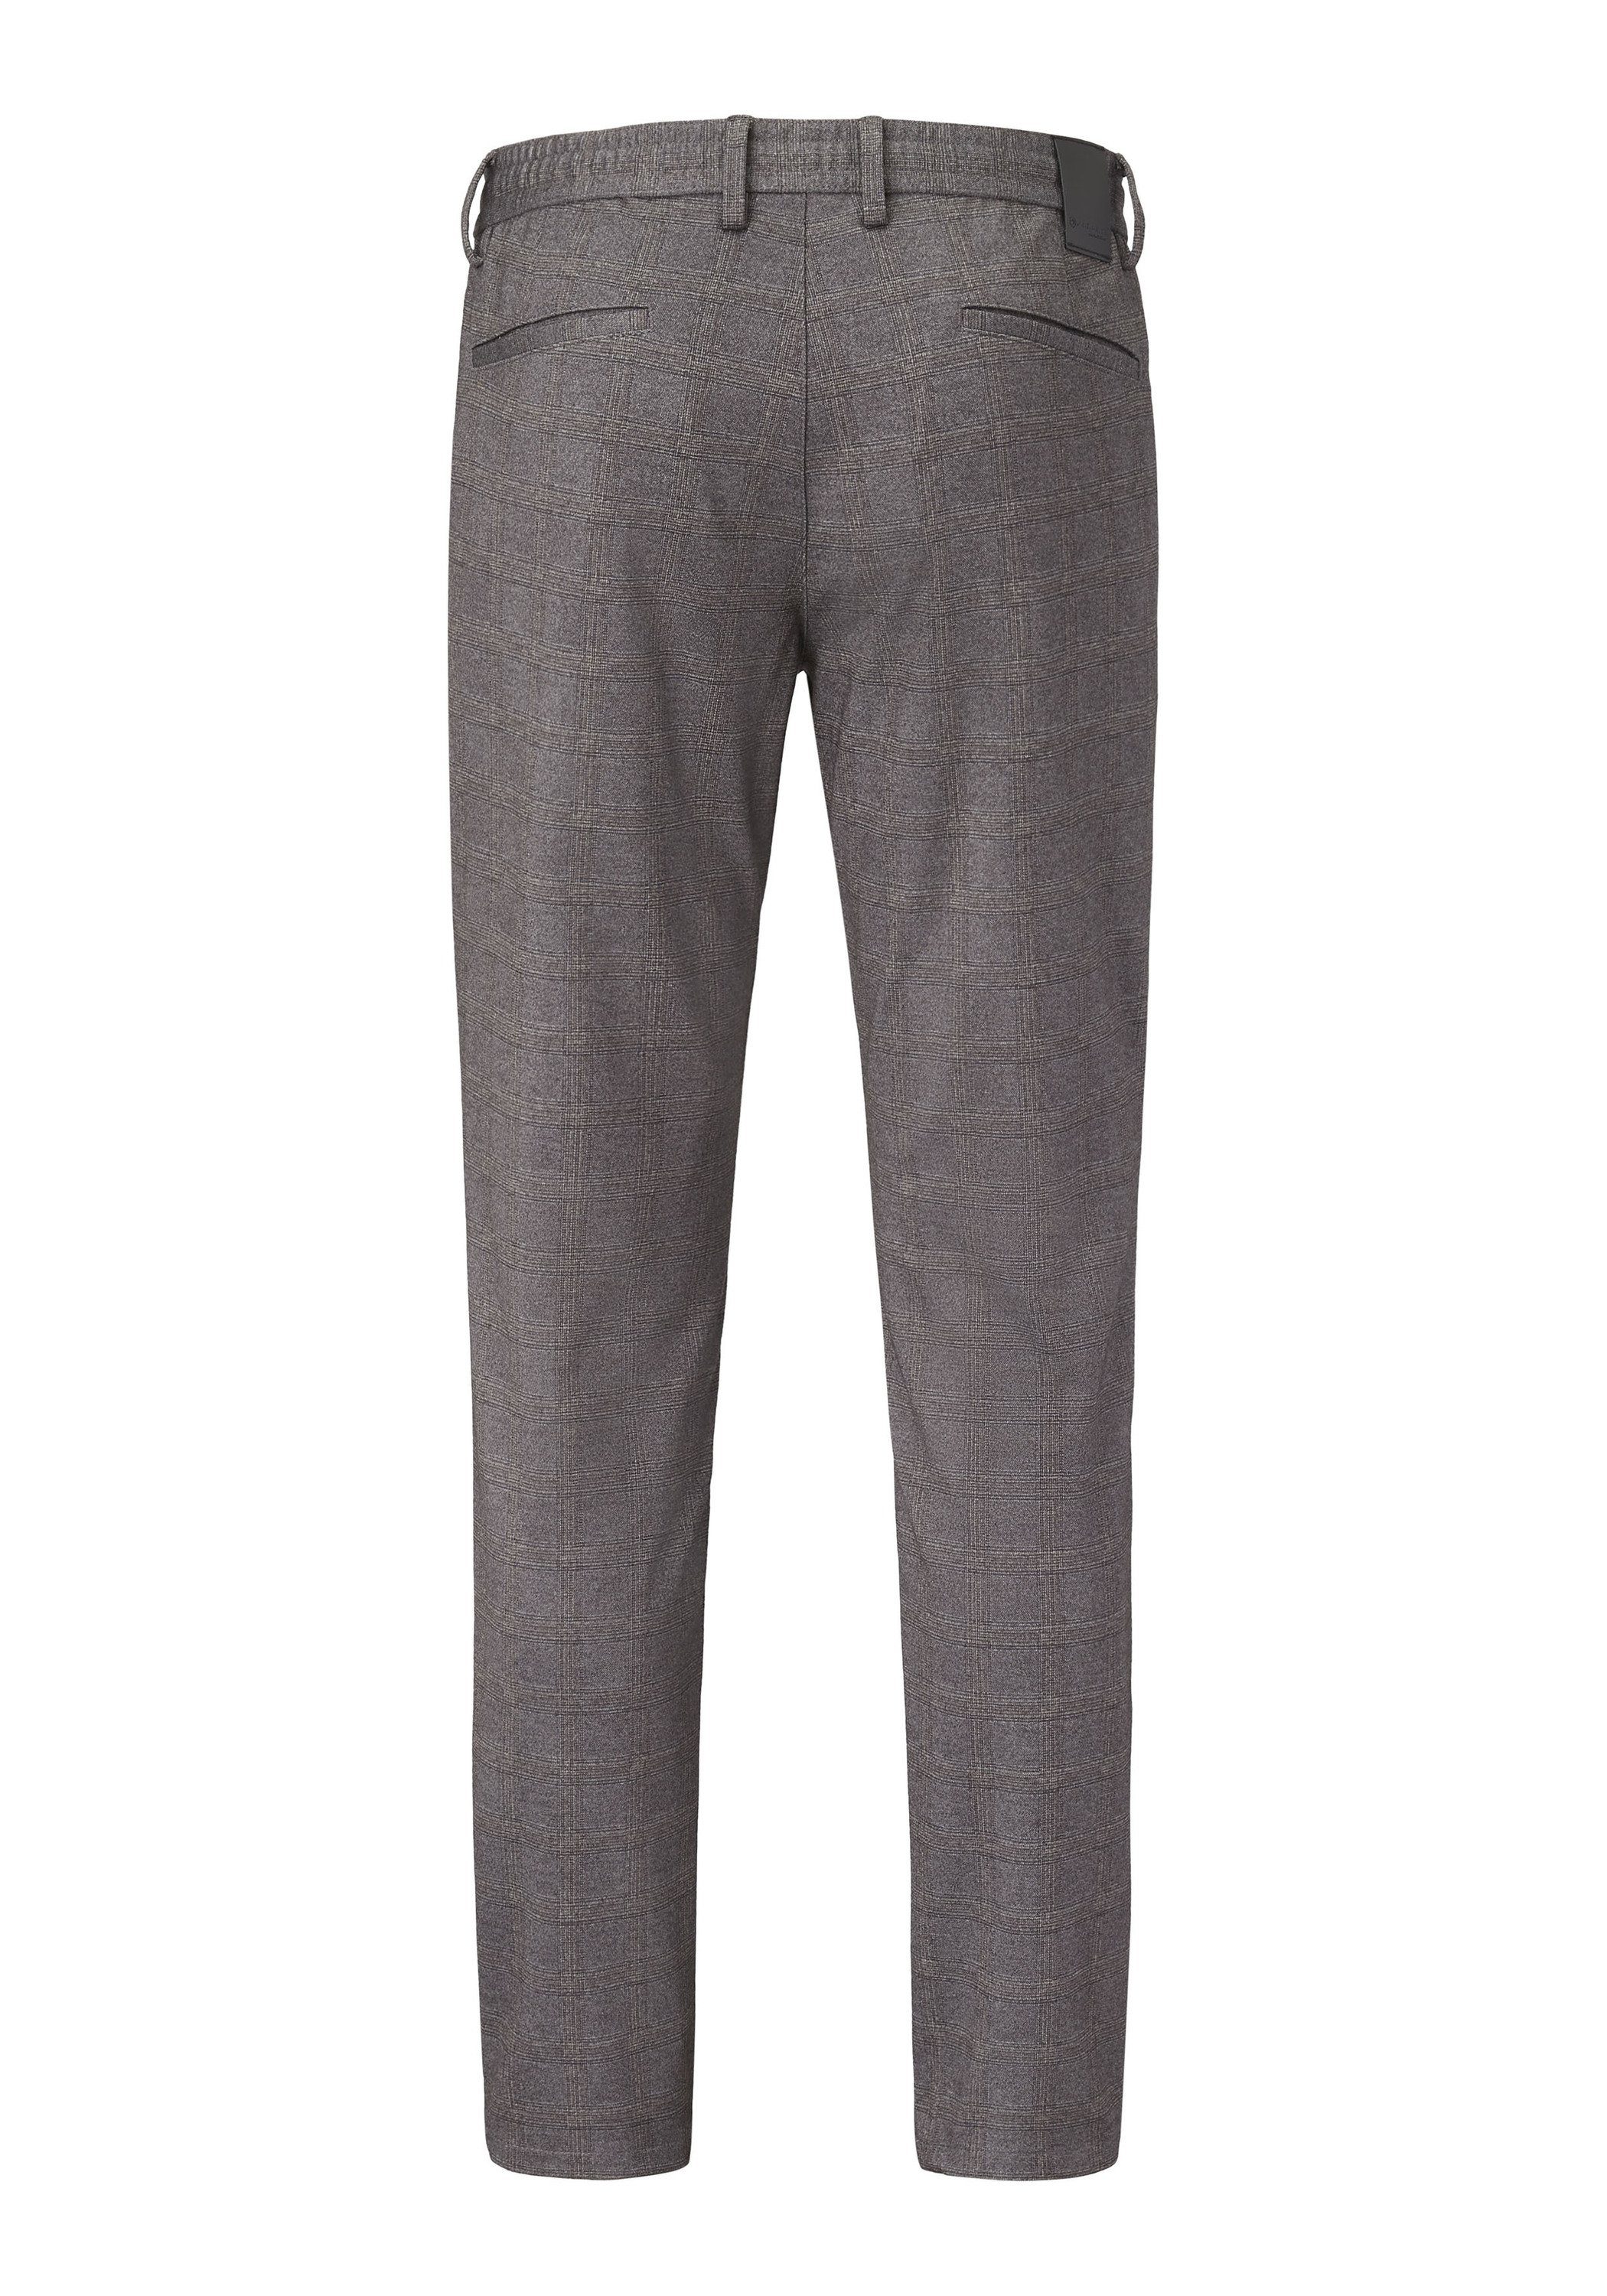 COLWOOD check Chinohose grey Stoffhose Slim-Fit mit Jogg Redpoint Stretch